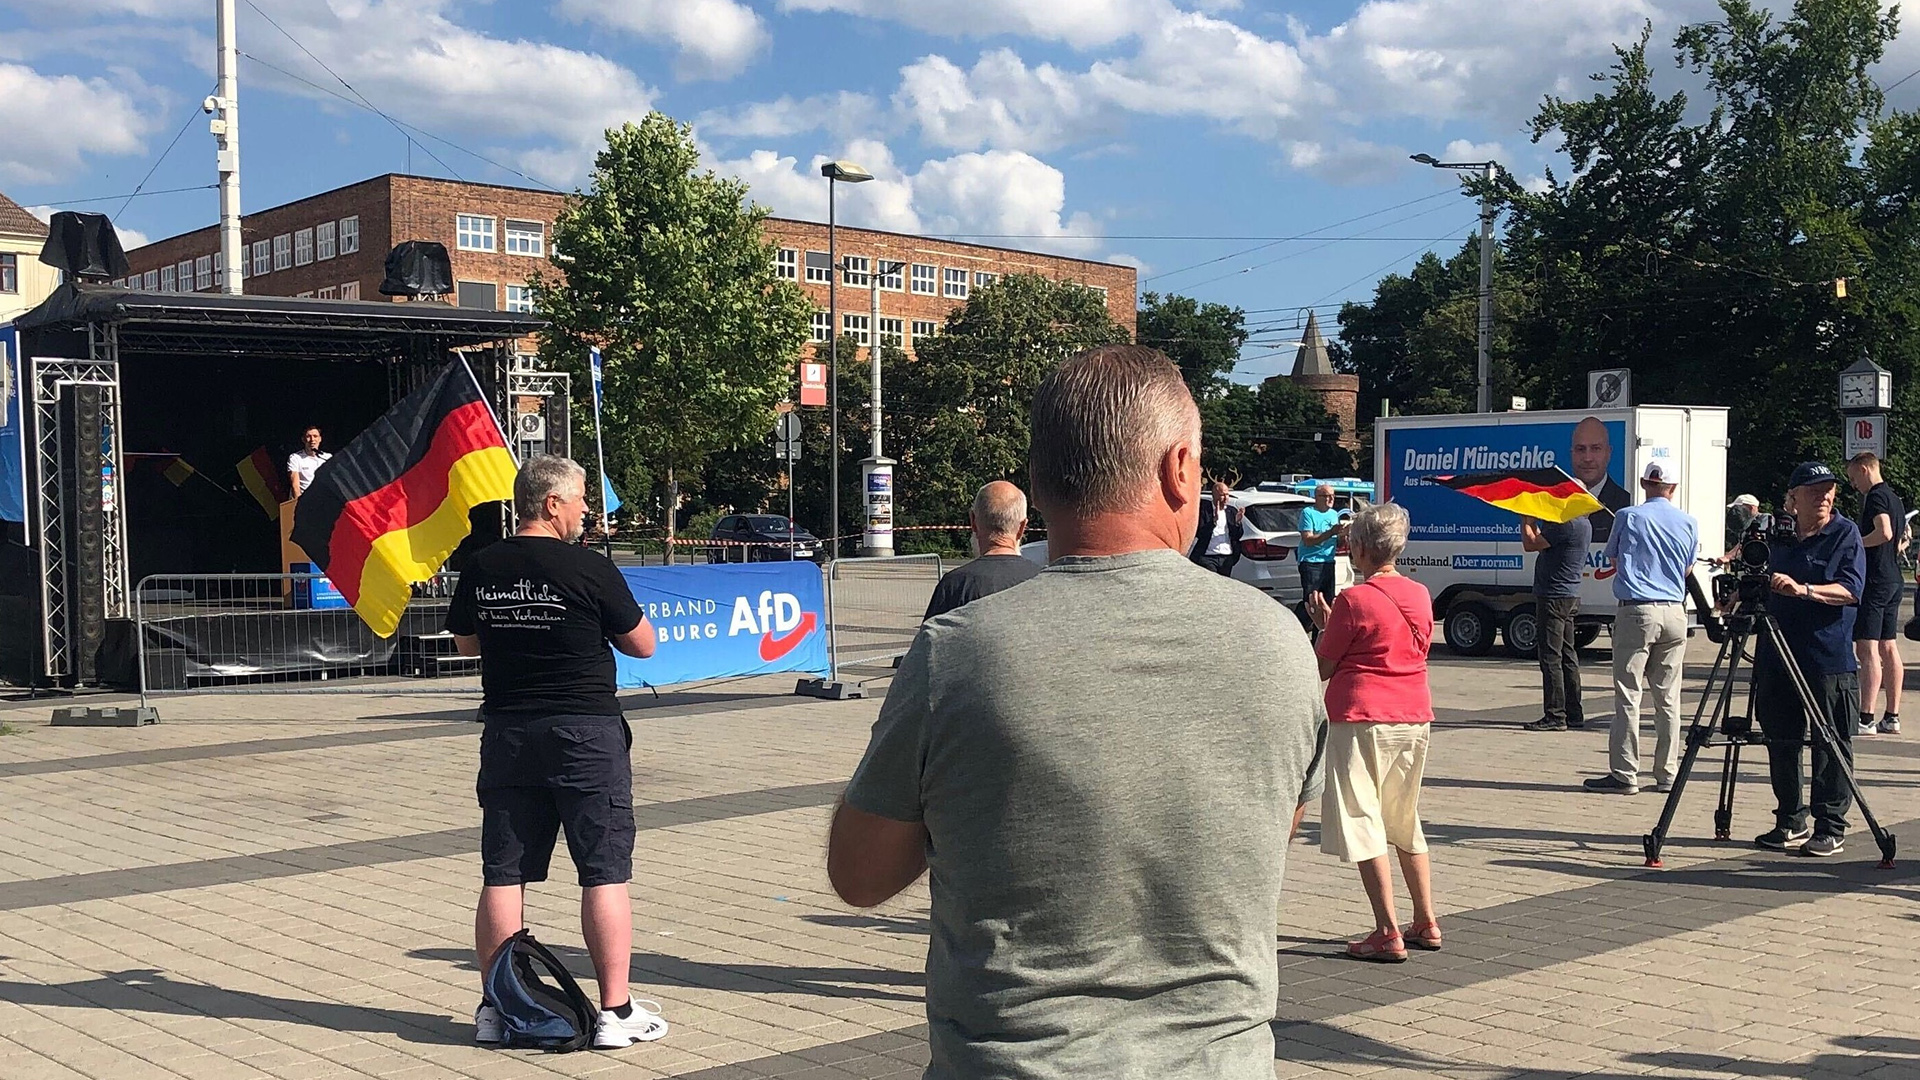 AfD-Wahlkampf in Cottbus | picture alliance/dpa